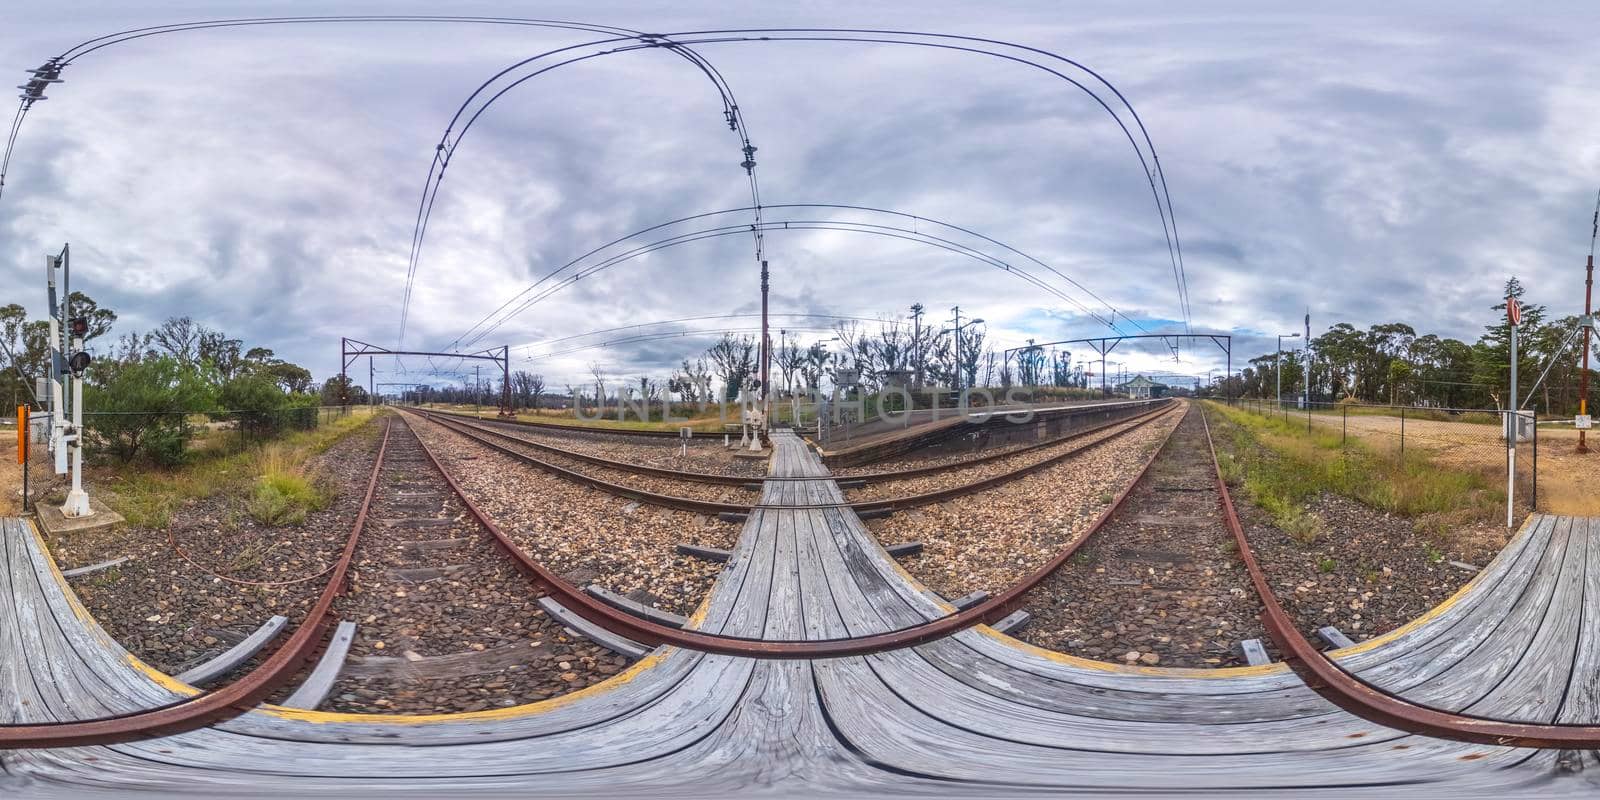 Spherical 360 panorama photograph of the Bell Railway Station in The Blue Mountains by WittkePhotos